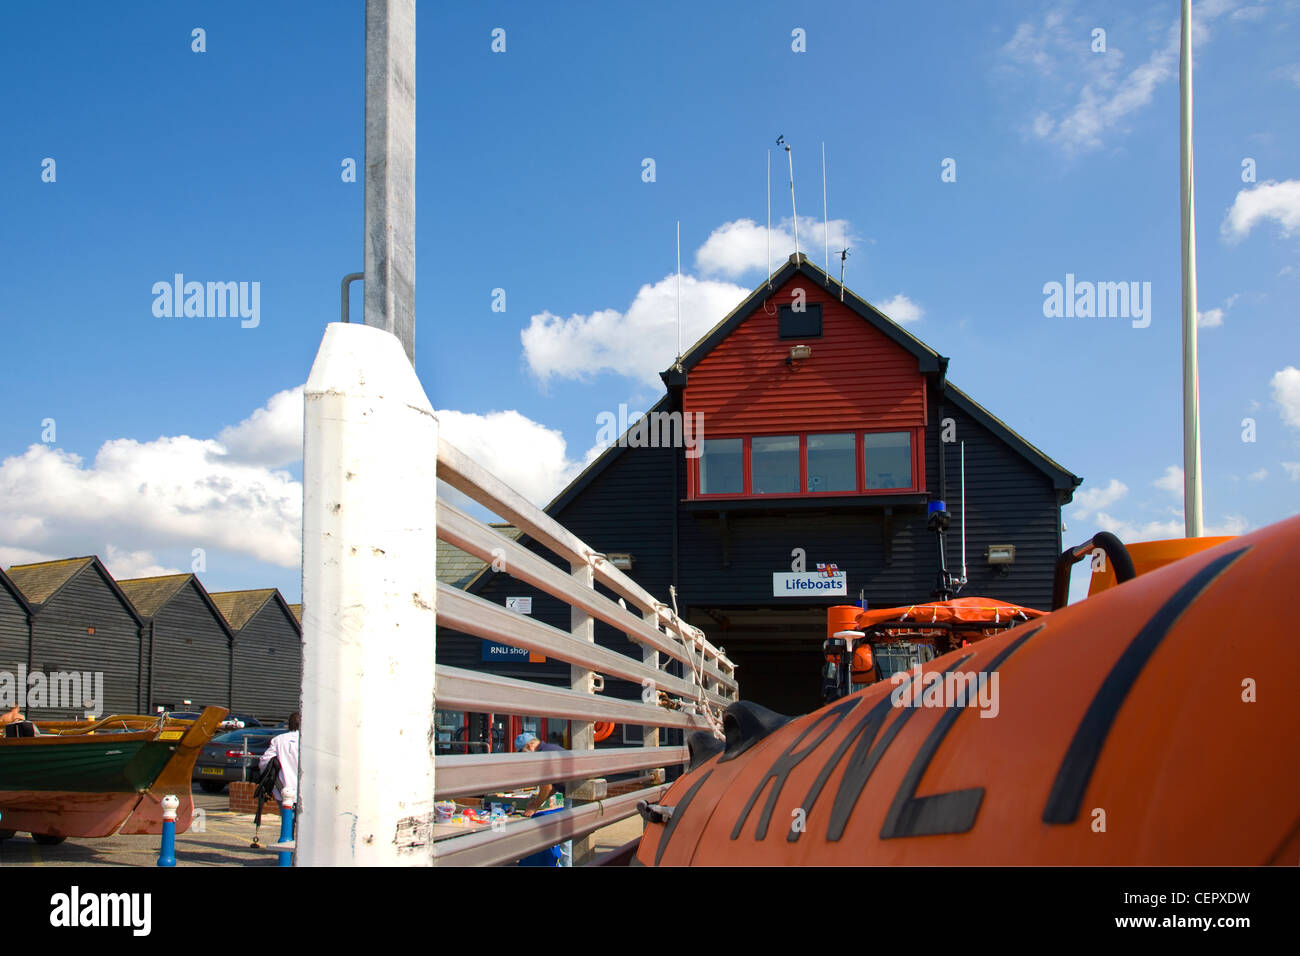 The RNLI lifeboat in front of the life boat building in Whitstable. Stock Photo